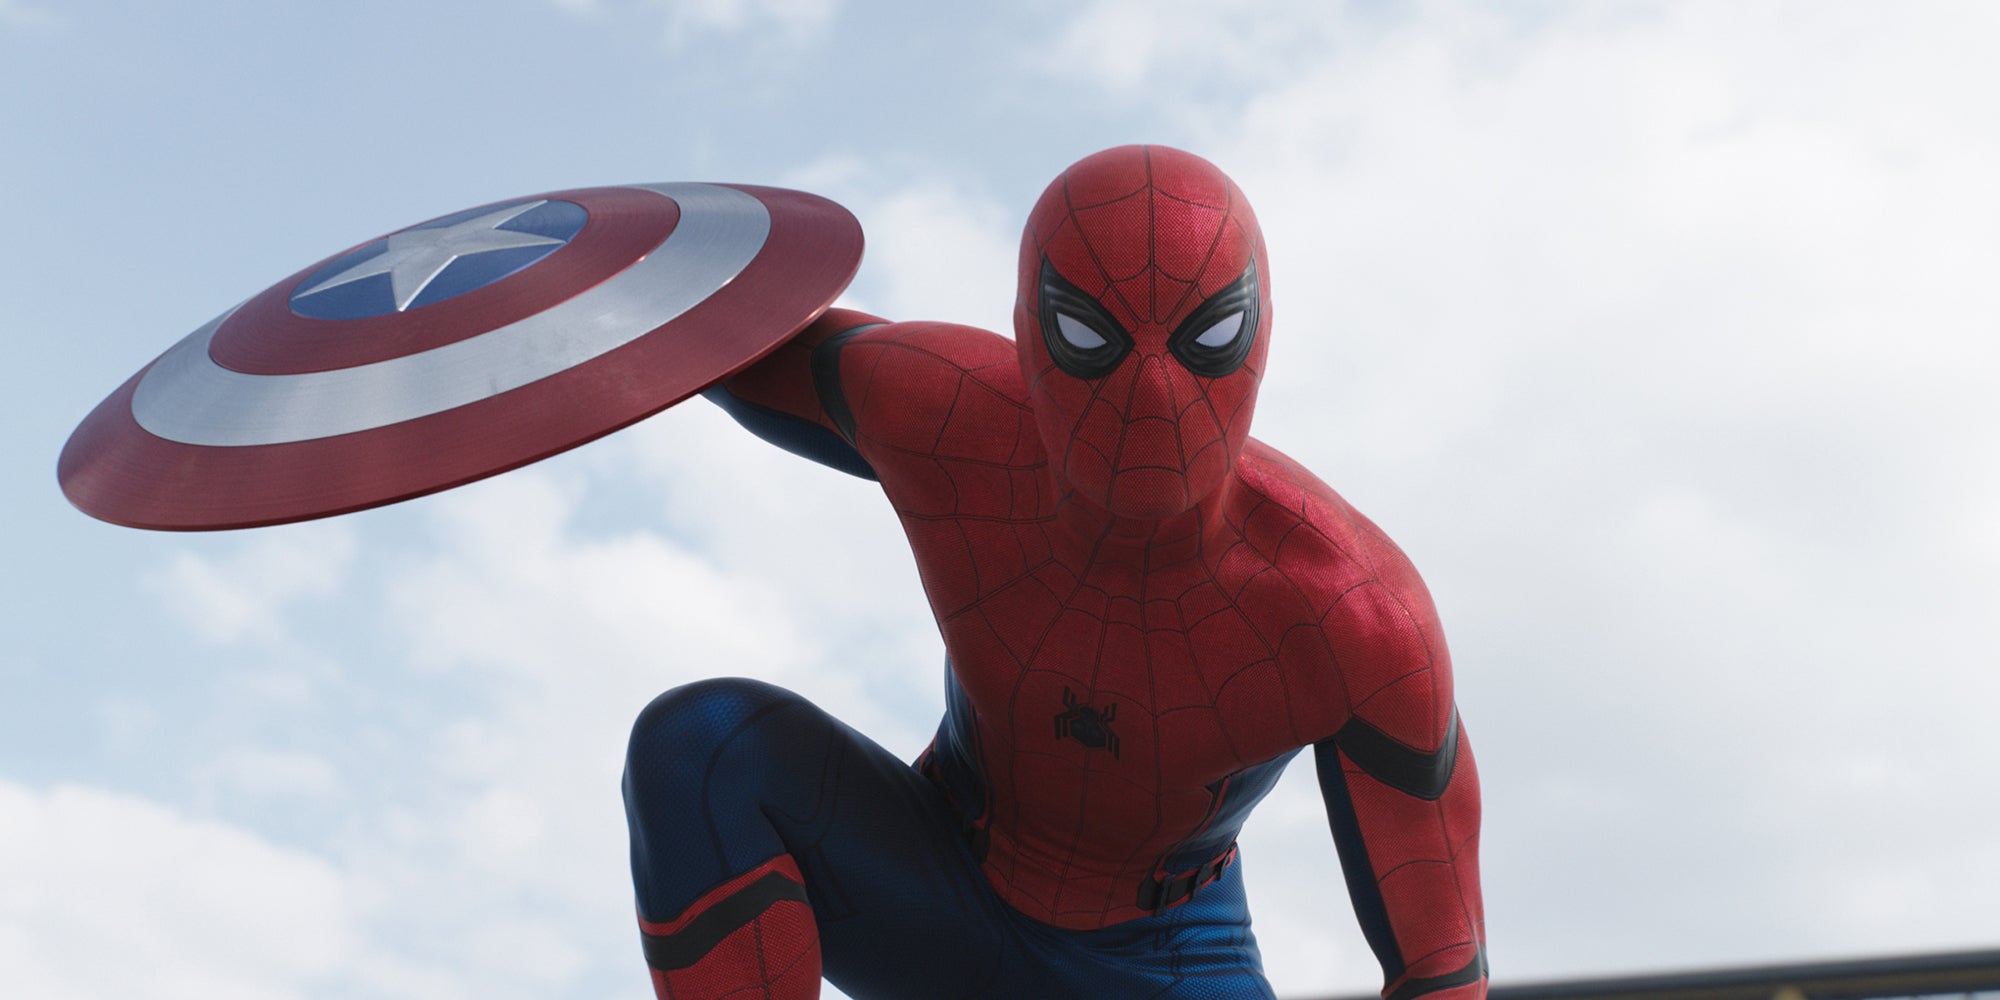 In a screencap from the film Captain America: Civil War, Spider-Man holds Captain America’s shield during his first appearance in his full costume in the MCU.